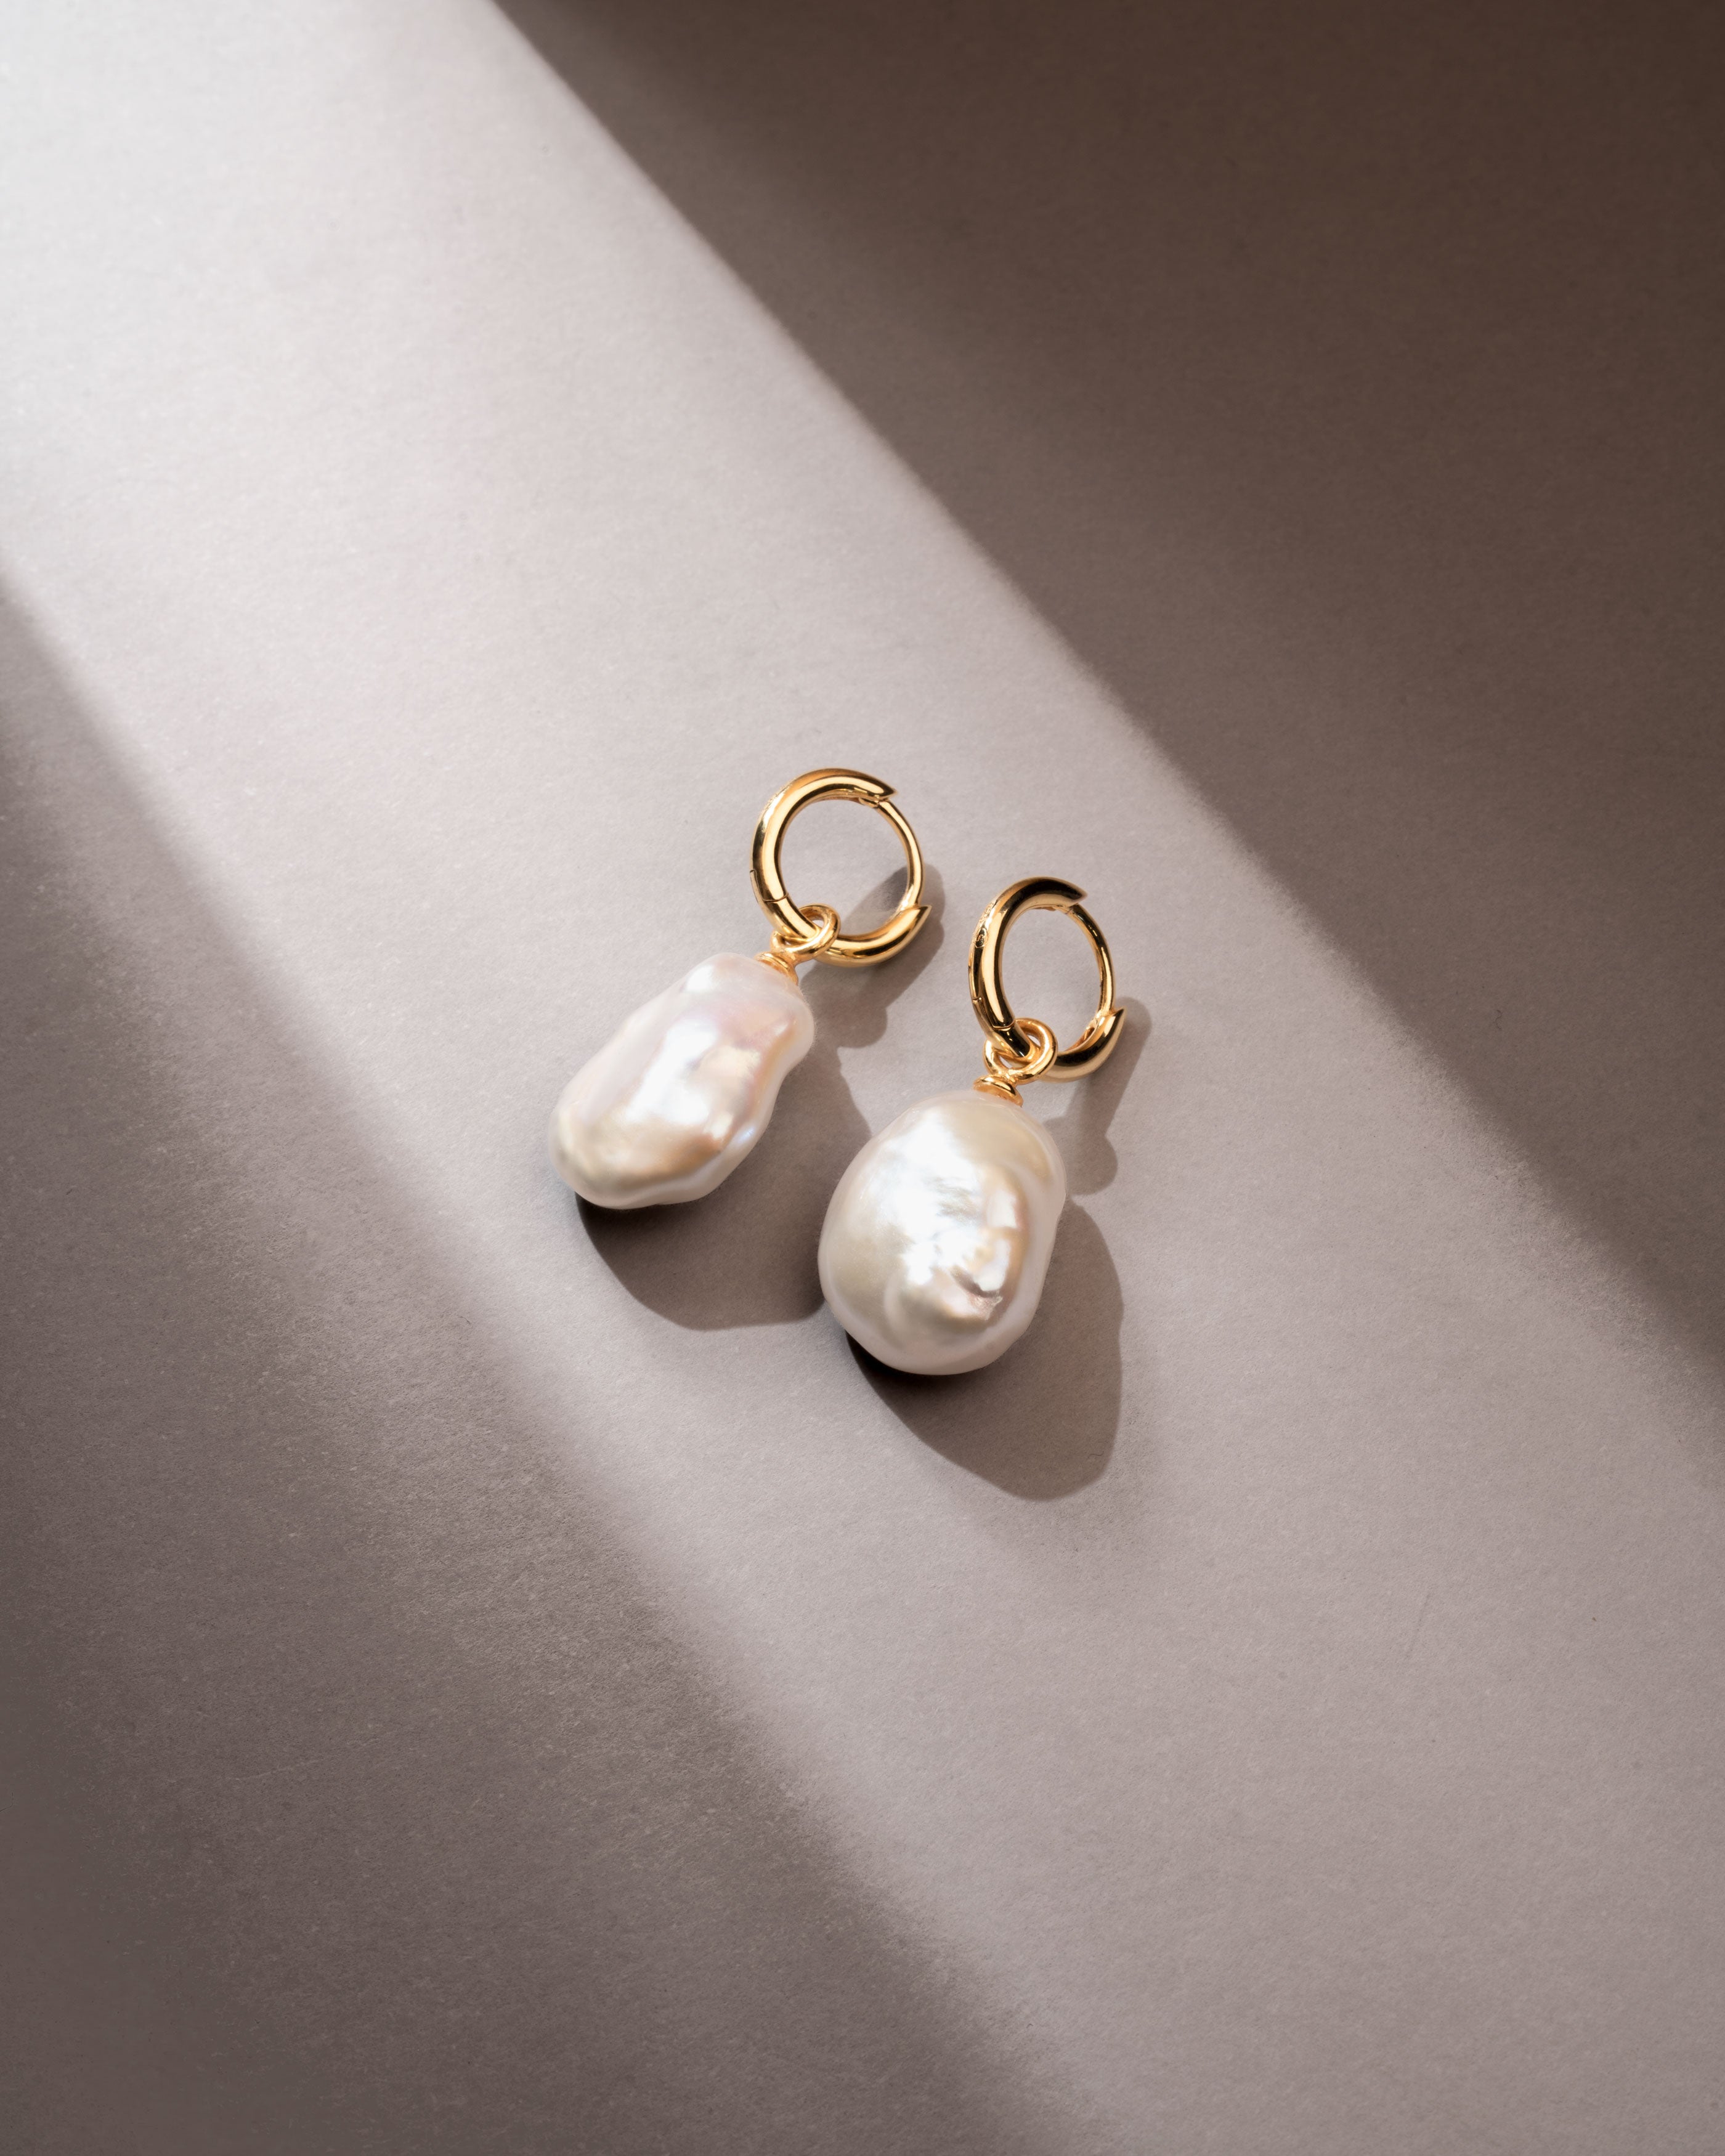 12 mm 18k Gold Hoops with Keshi Pearl